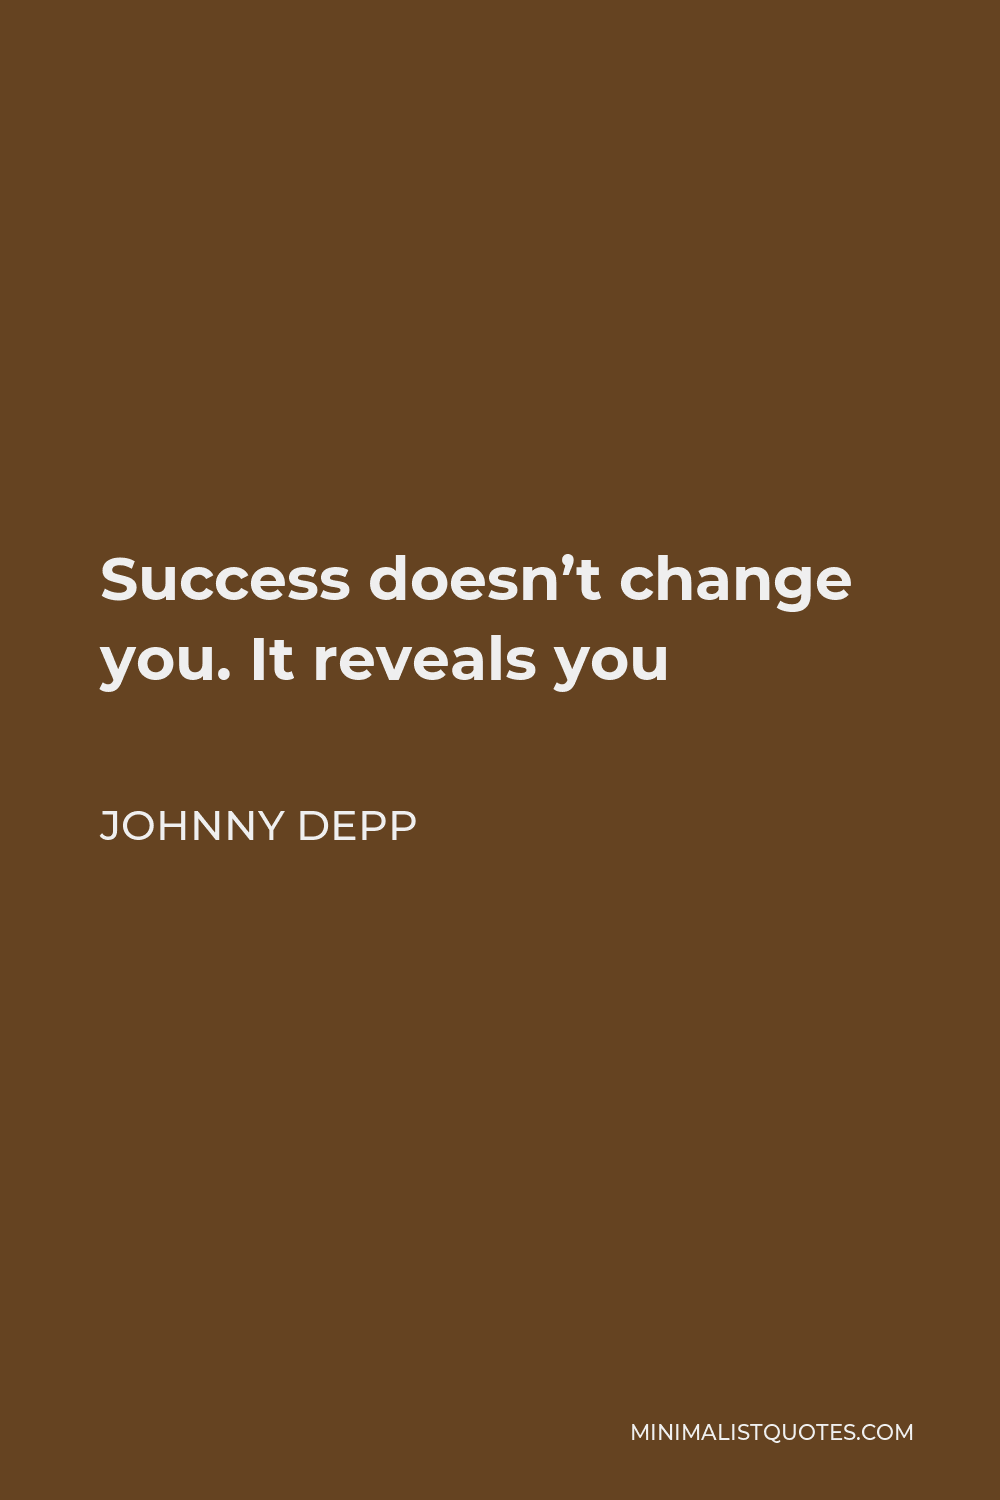 Johnny Depp Quote - Success doesn’t change you. It reveals you